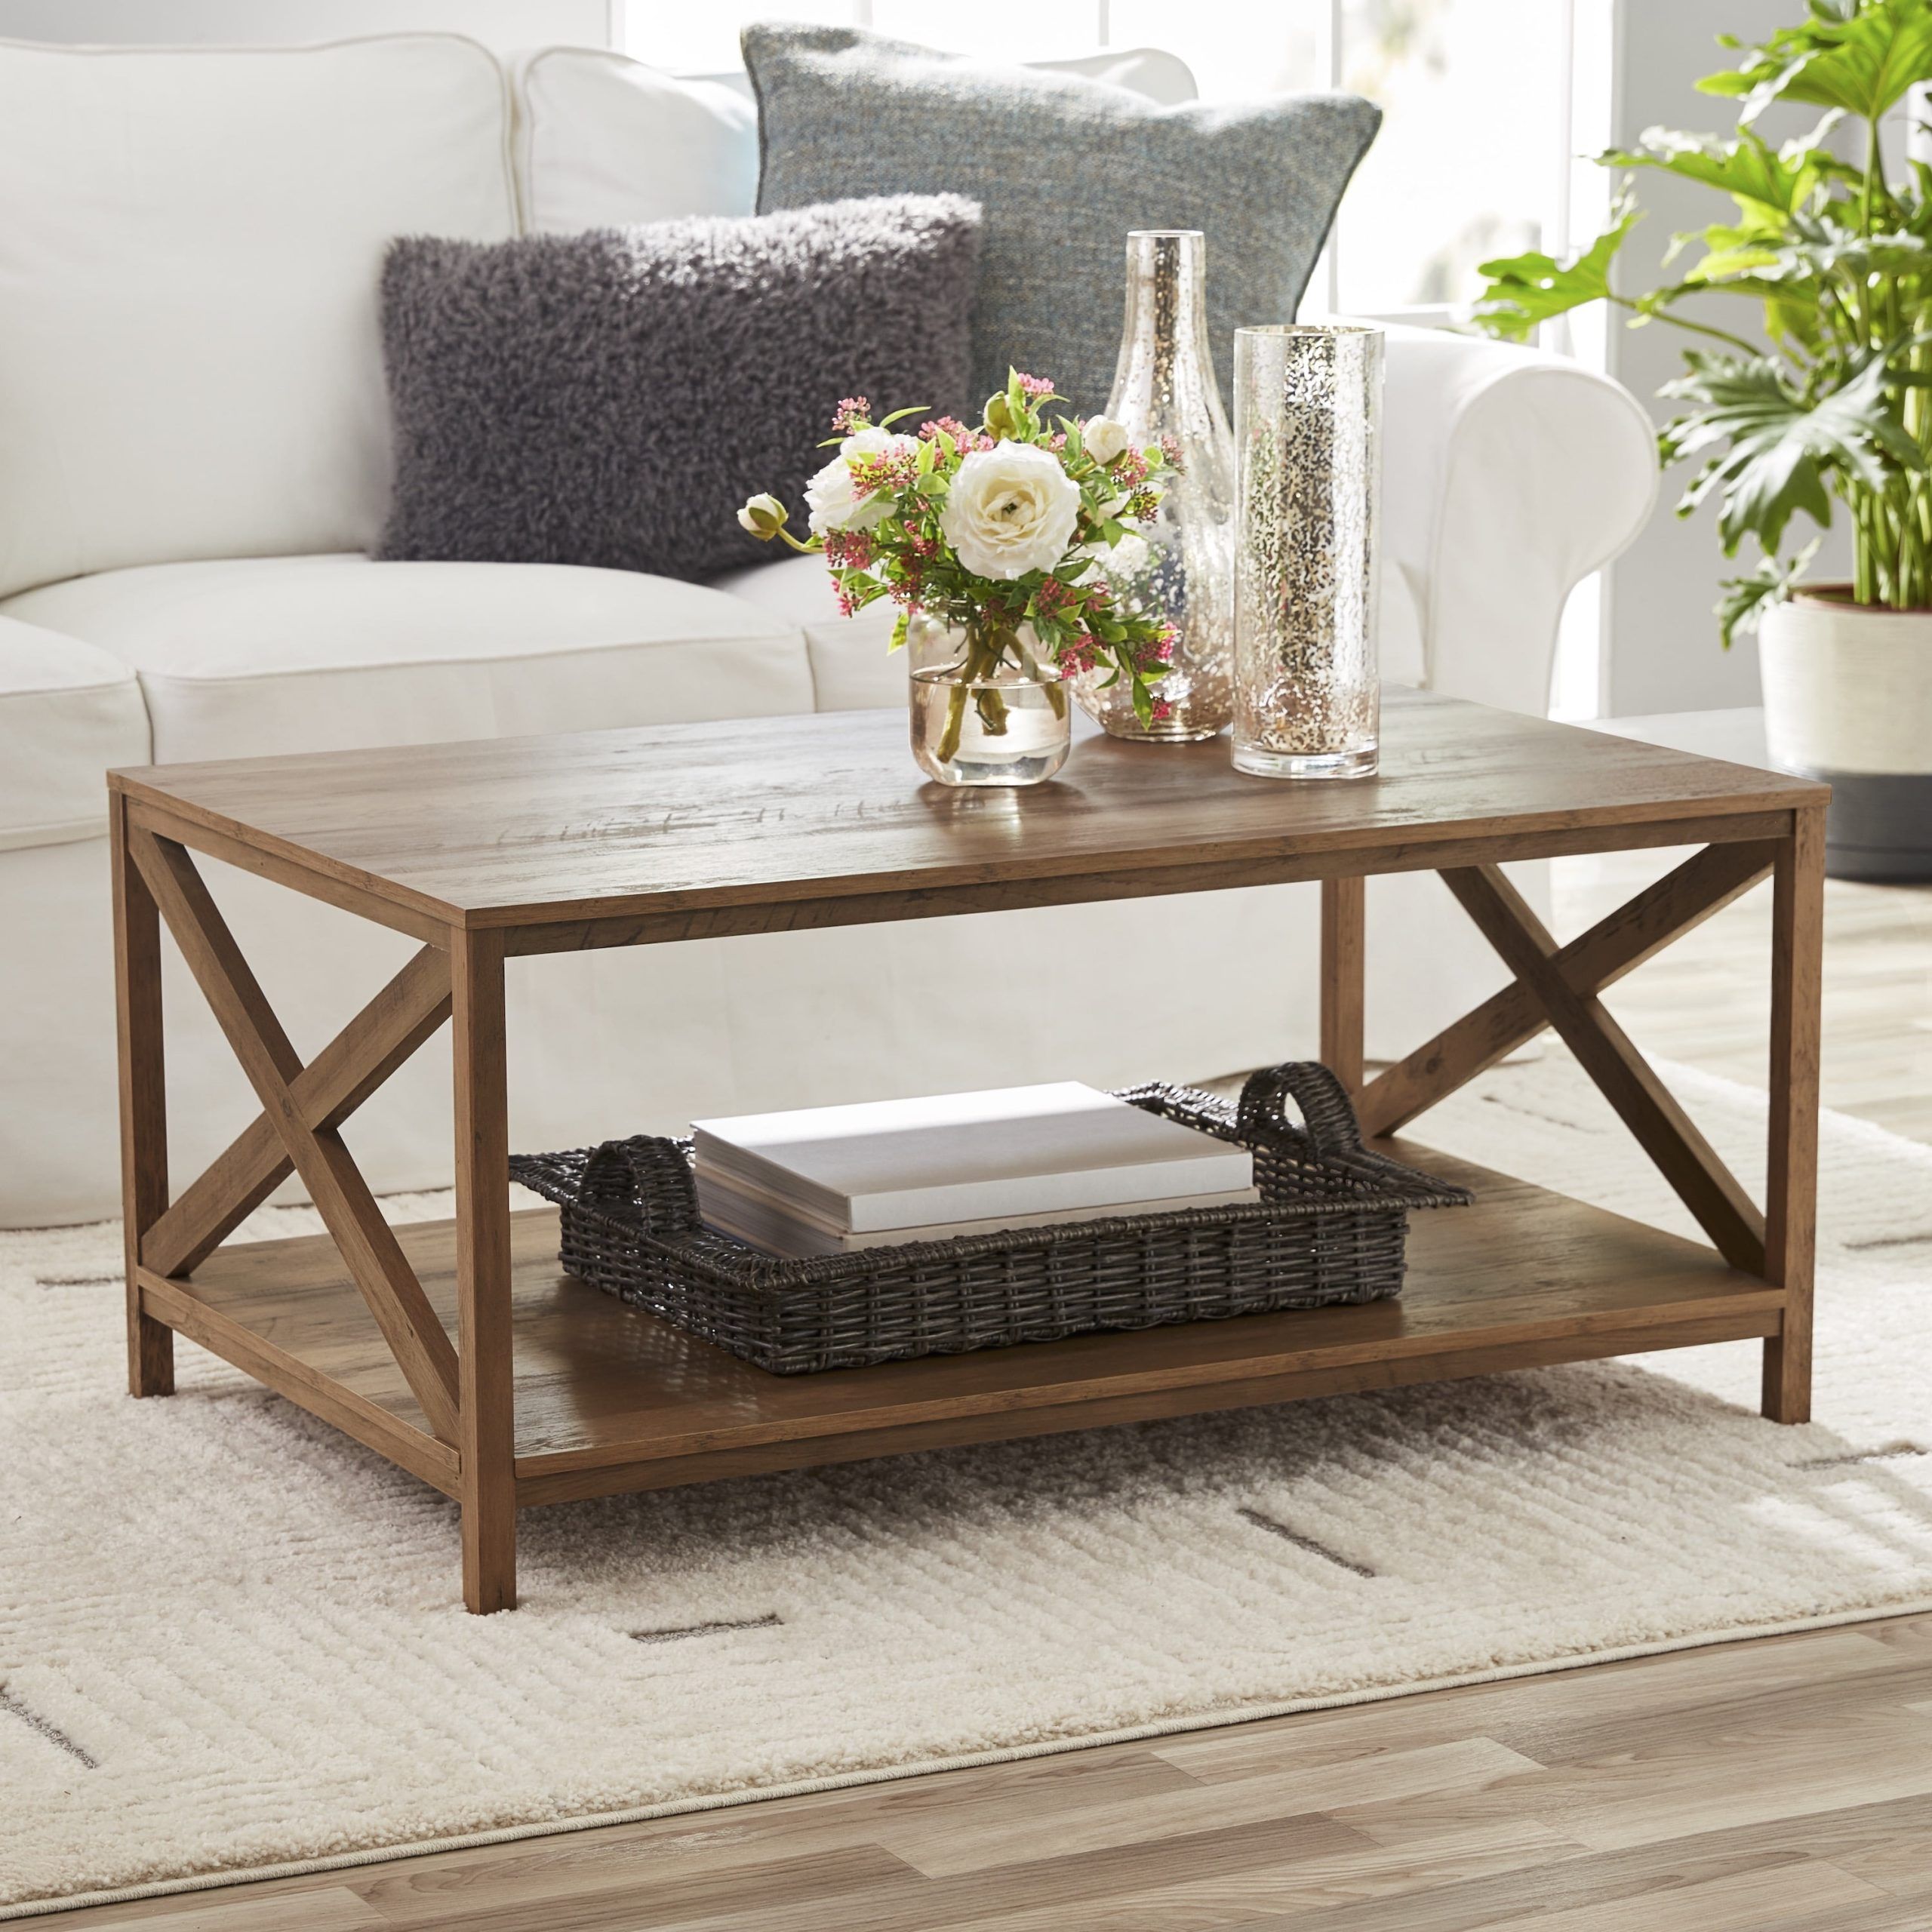 Farmhouse X Design Rectangle Coffee Table, Rustic Weathered Oak – Bed Bath  & Beyond – 36966361 Within Modern Wooden X Design Coffee Tables (Photo 8 of 15)